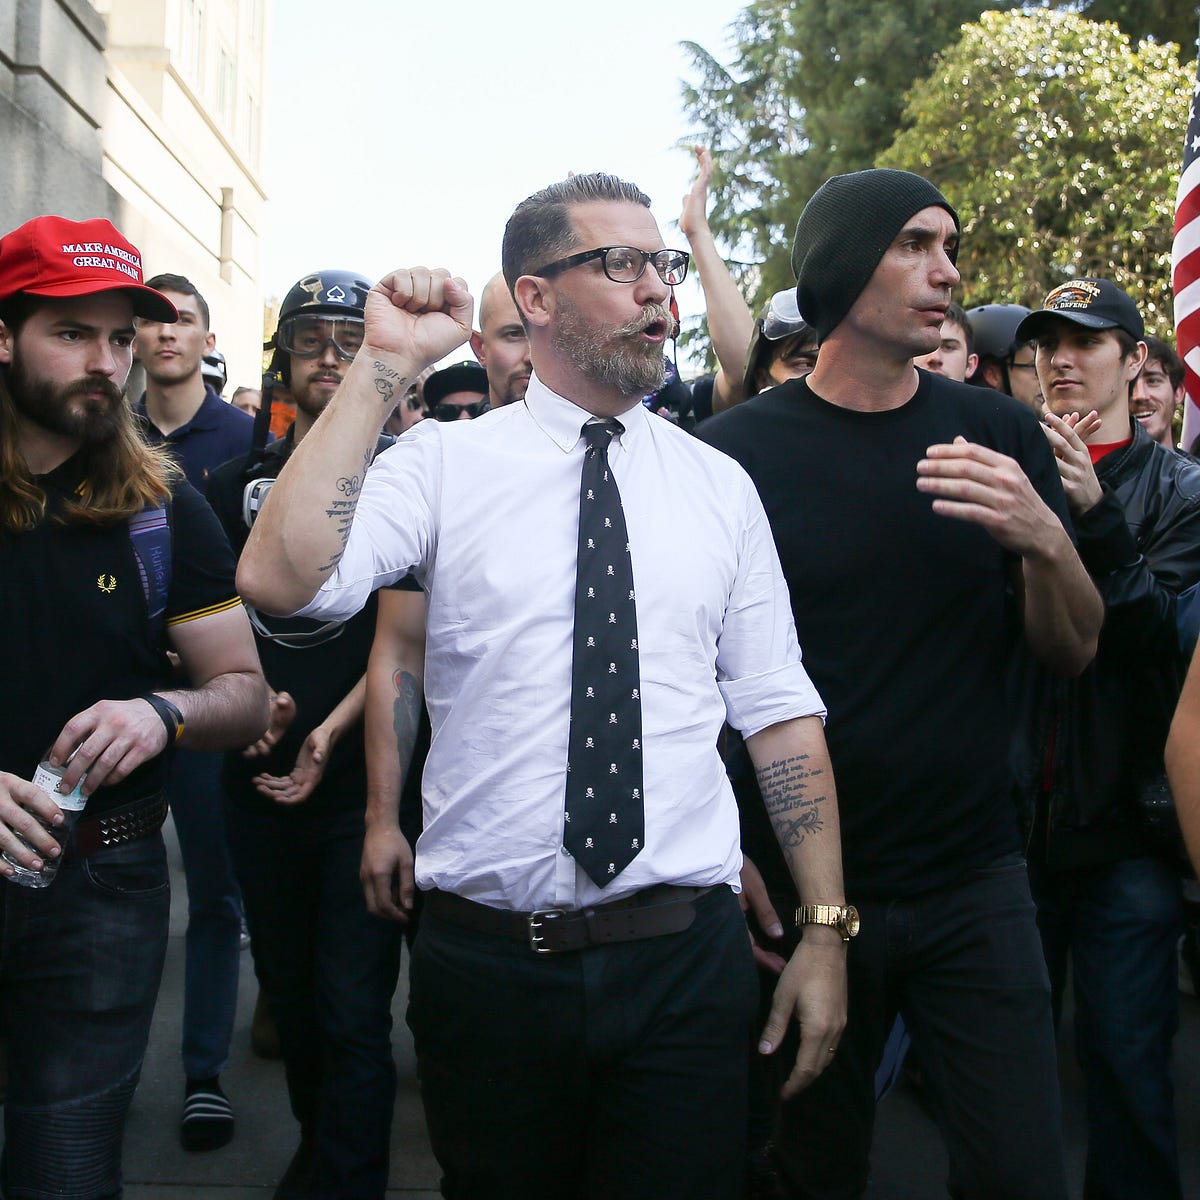 Boy Masturbating - Why Are The Proud Boys So Obsessed With Not Masturbating?